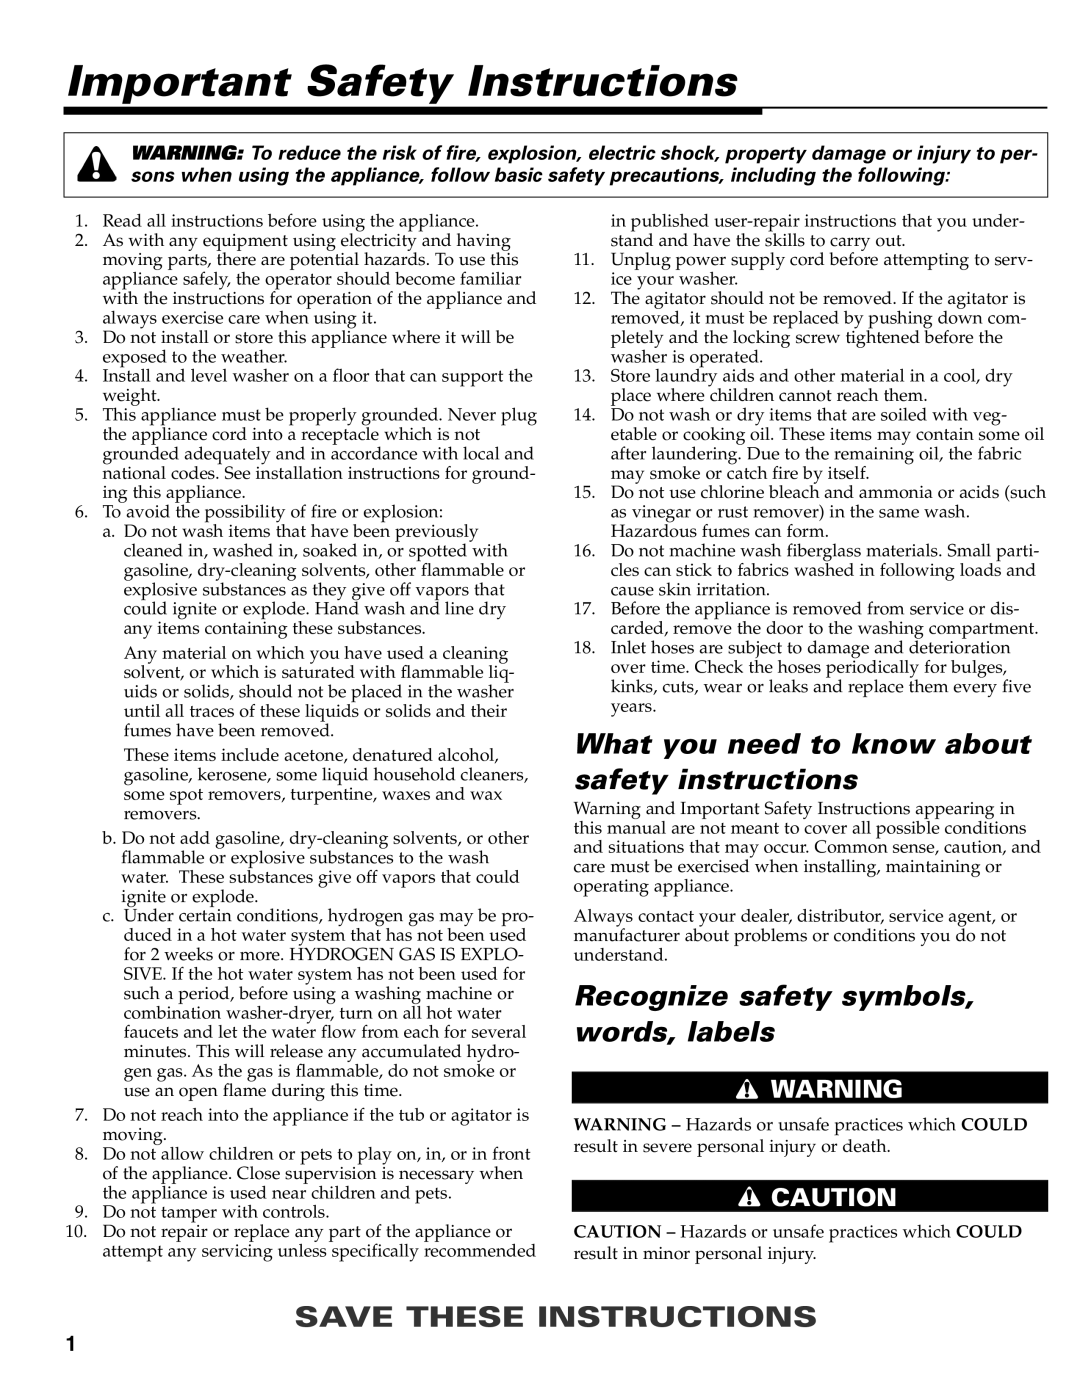 Maytag MAV-39 Important Safety Instructions, What you need to know about safety instructions, Save These Instructions 